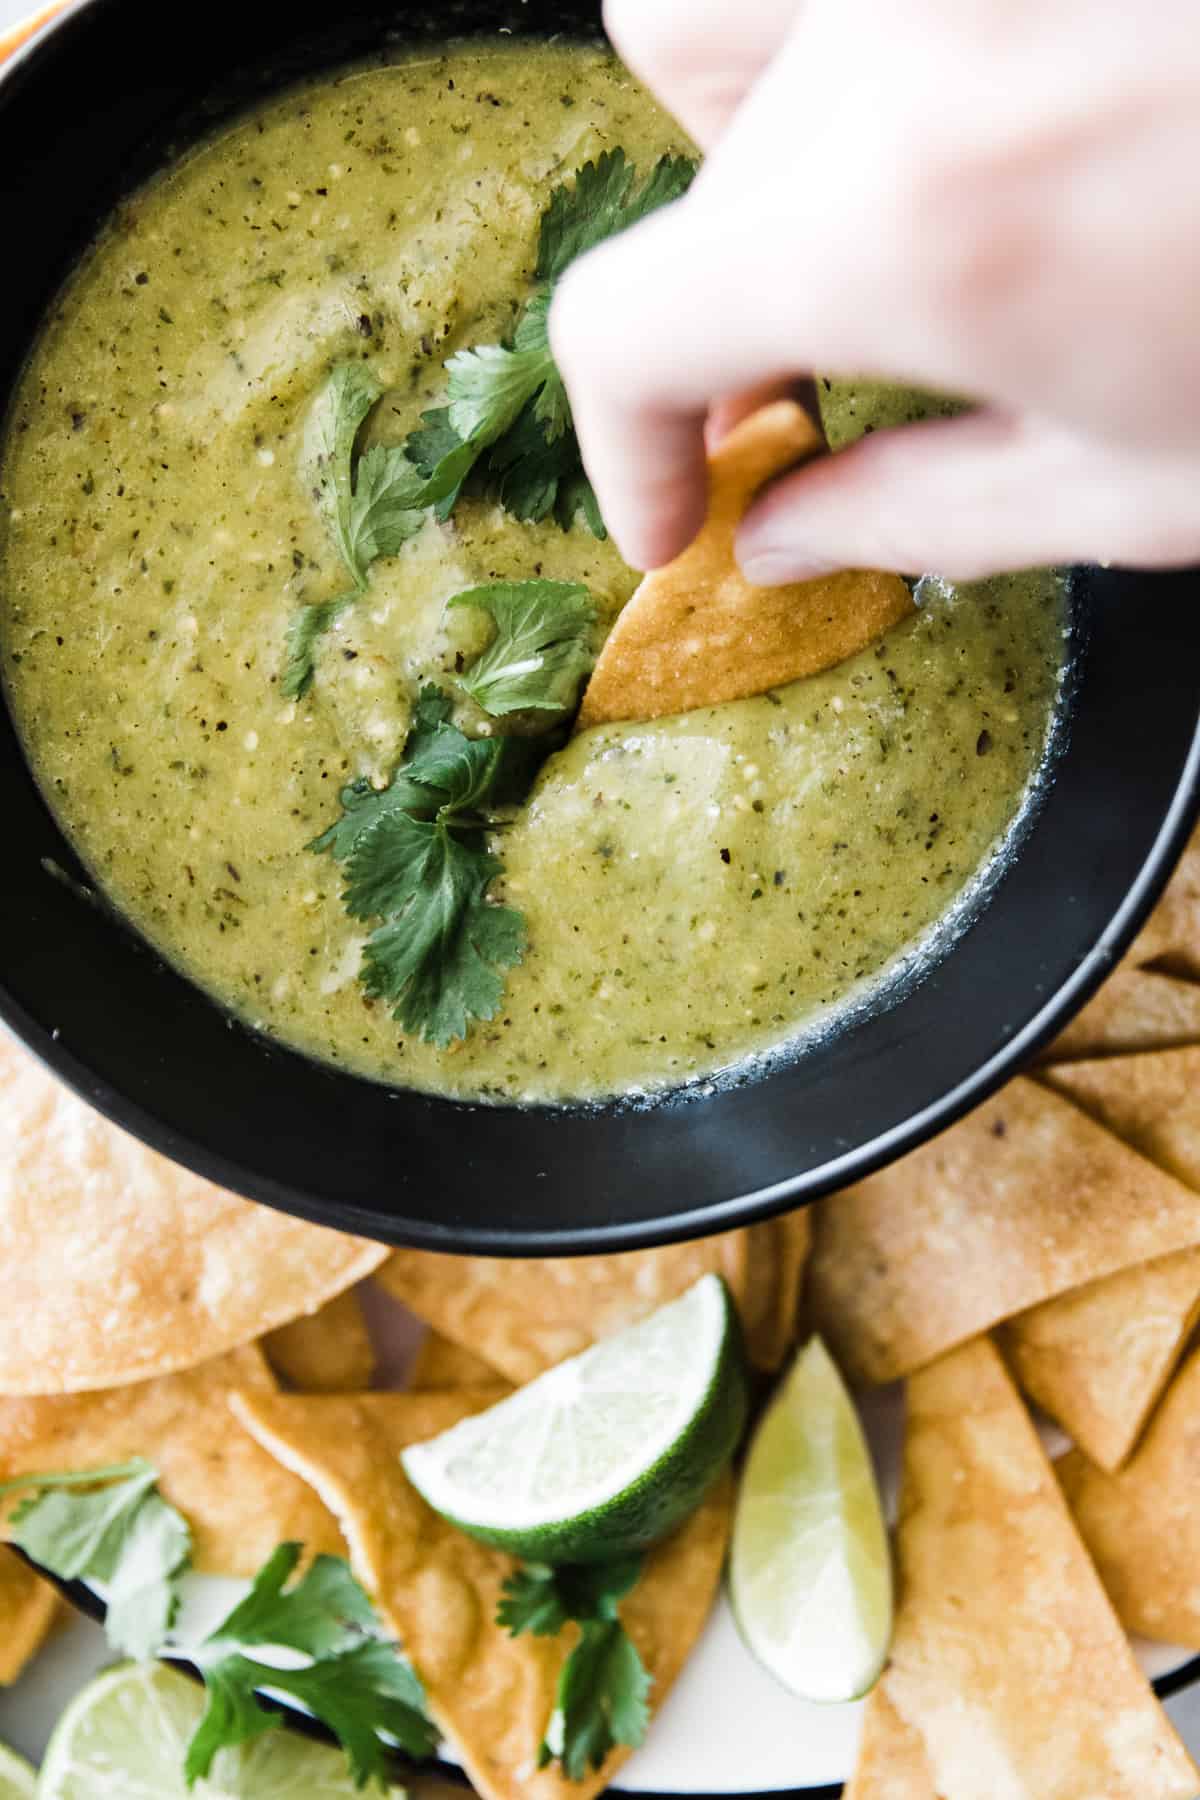 Tomatillo salsa verde in bowl with chip dipping into it.